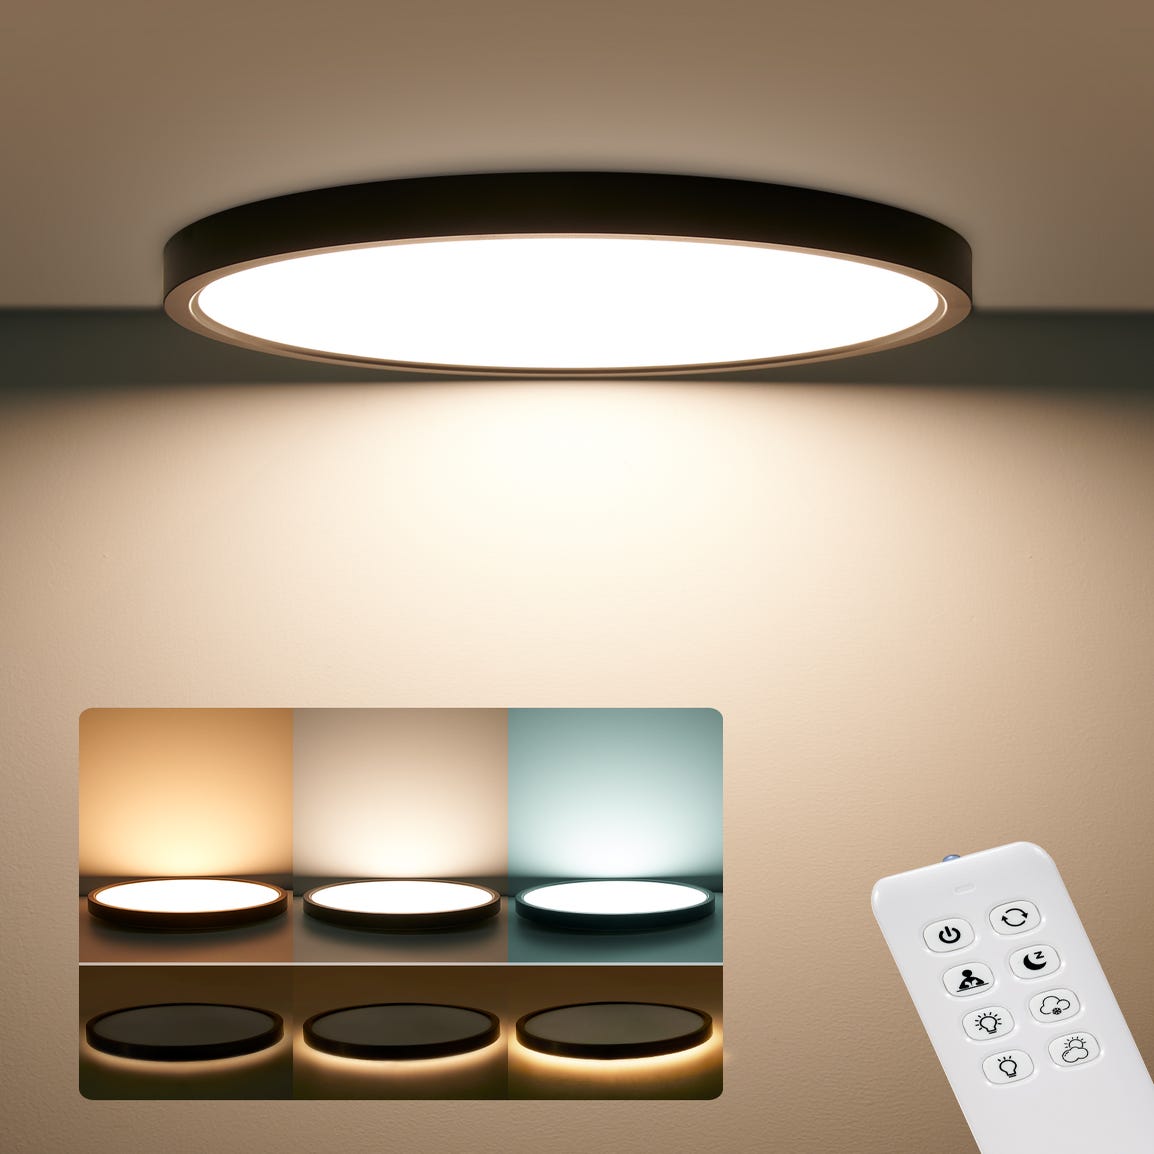 Anten plafonnier led dimmable rond 24w ultra-mince couleur